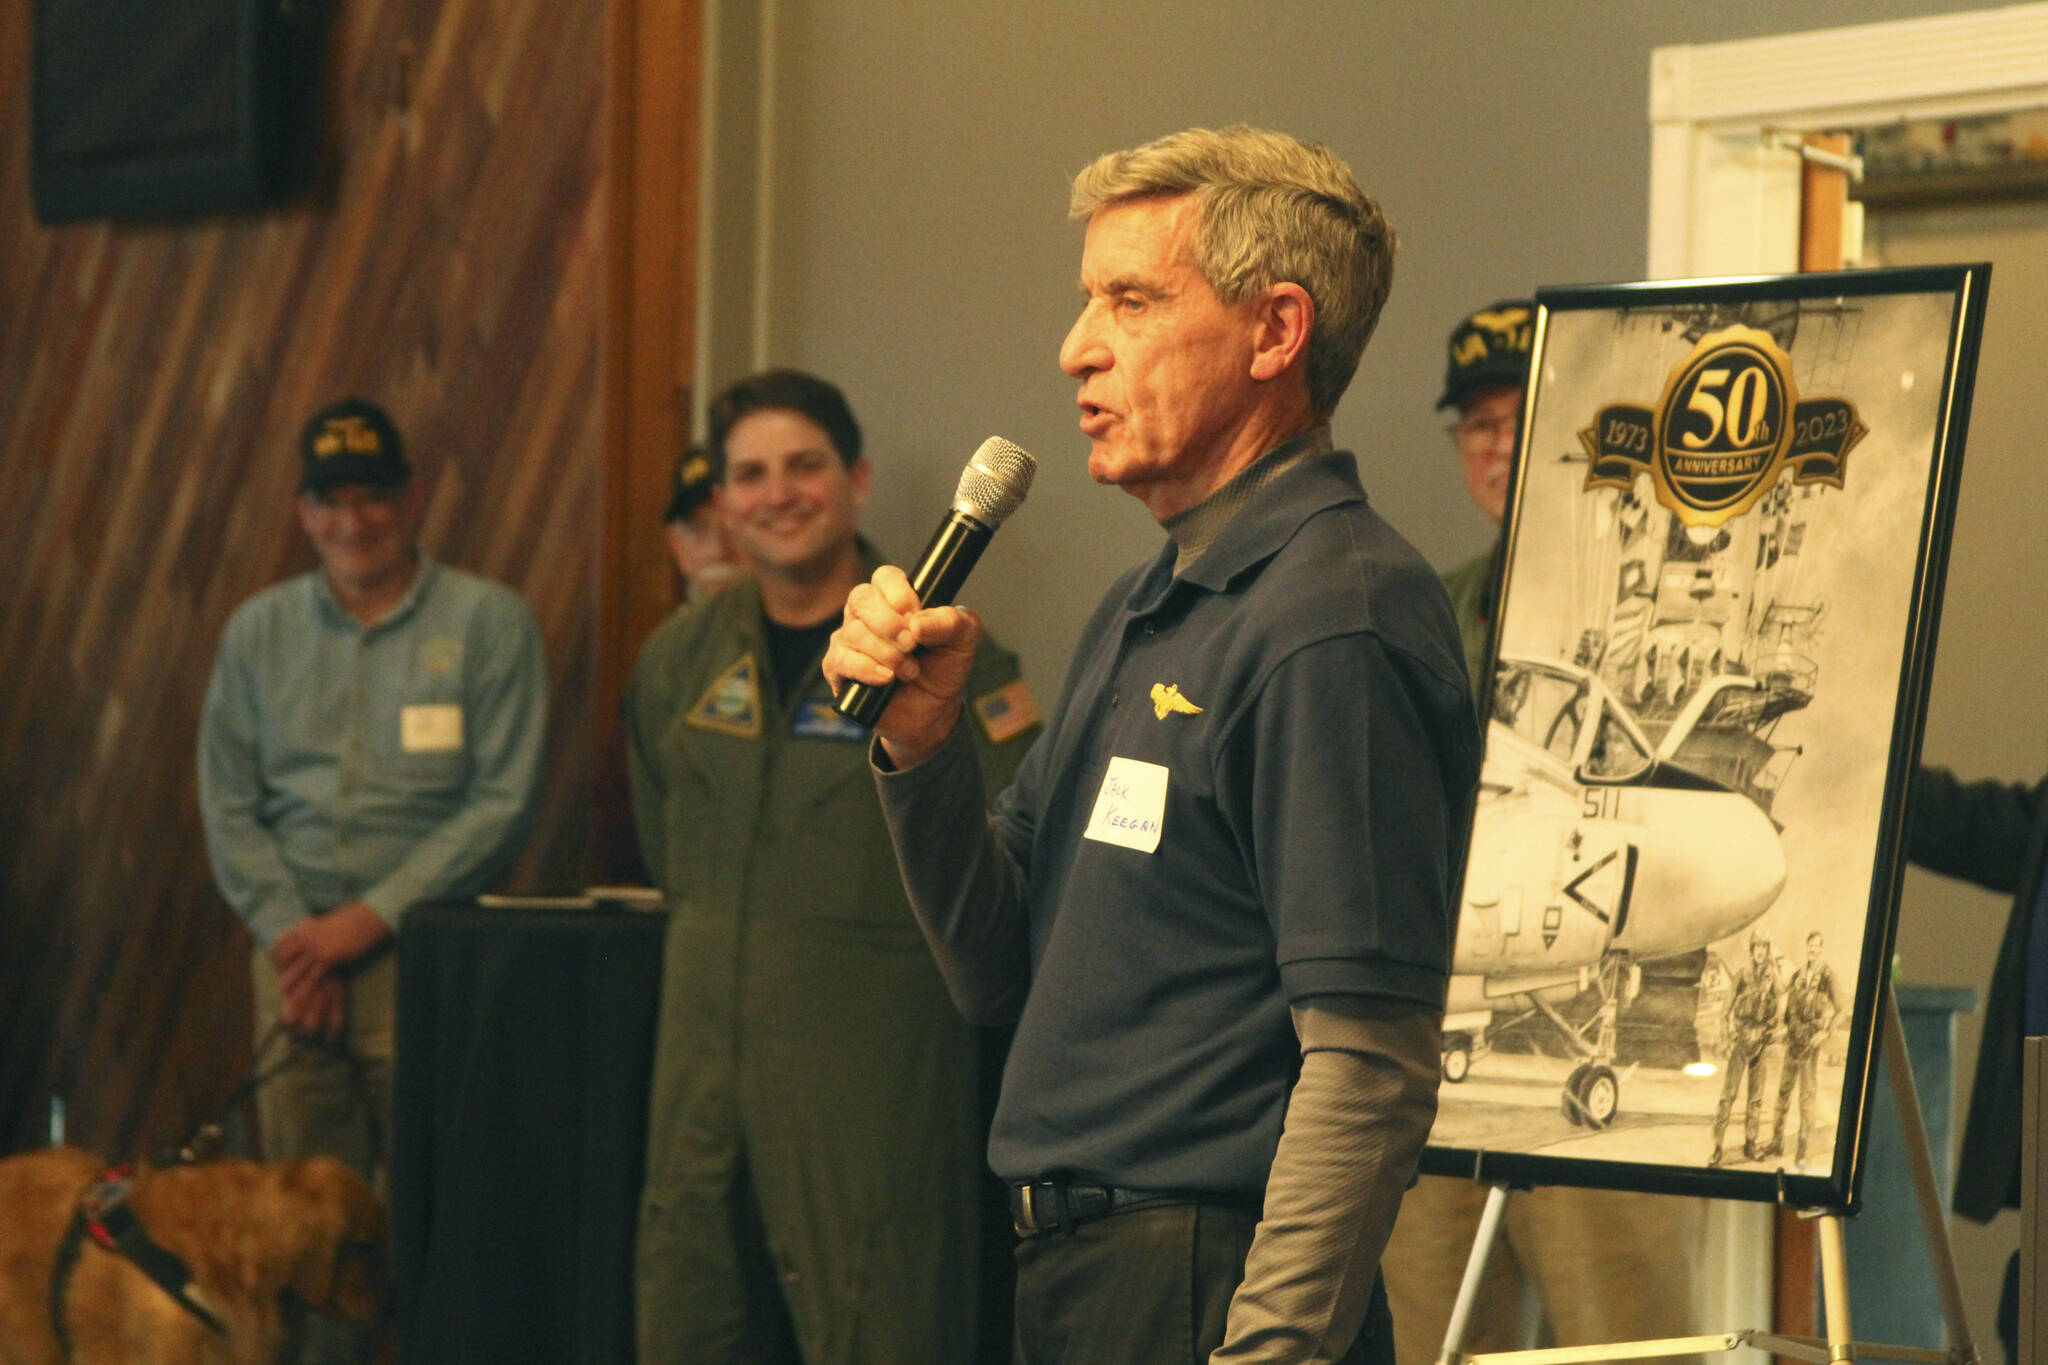 Photo by Karina Andrew/Whidbey News-Times
Former VA-115 member Jack Keegan speaks at a presentation on base commemorating the last crew from NAS Whidbey Island shot down during the Vietnam War.